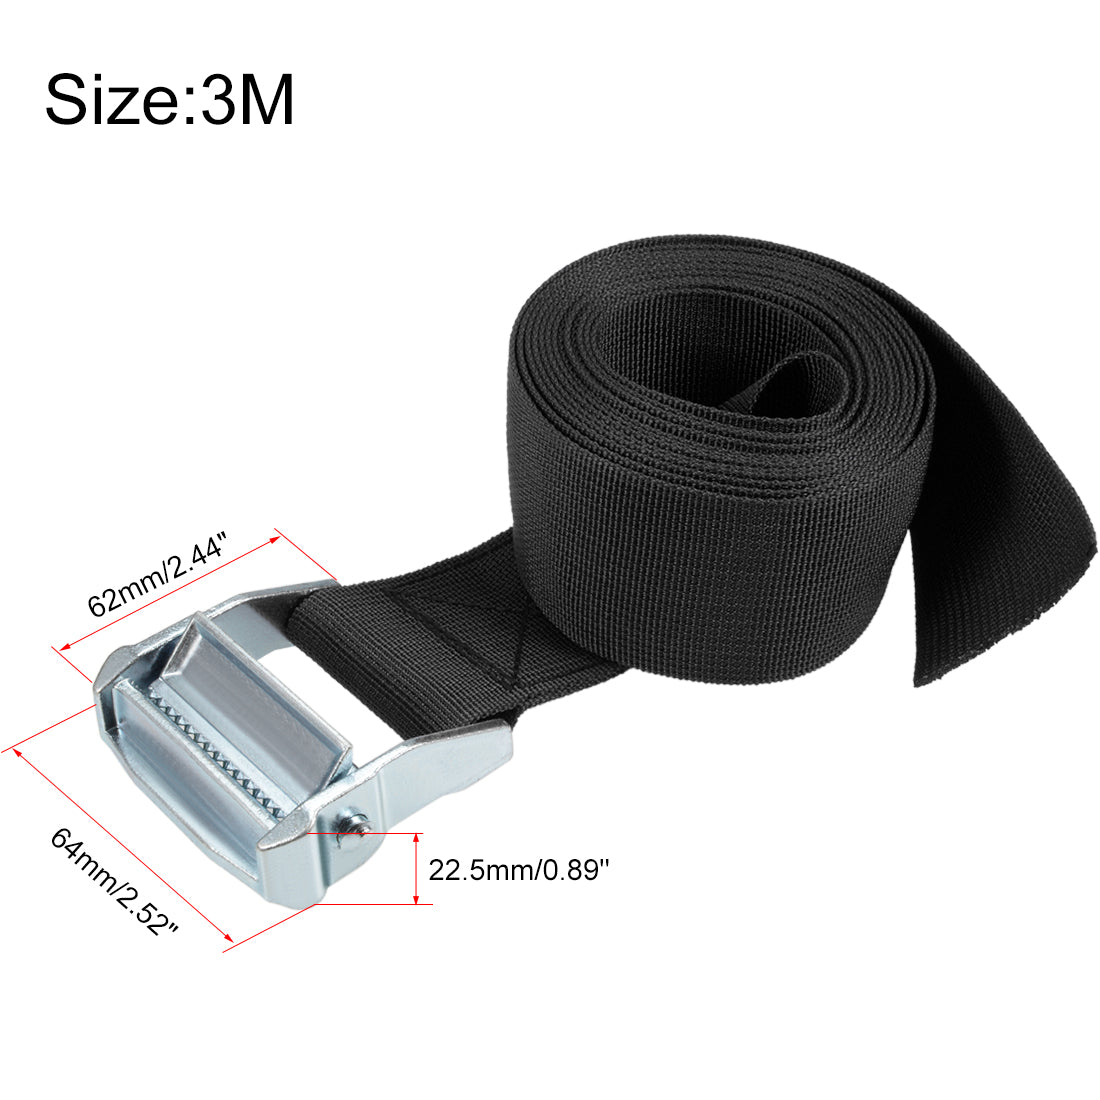 uxcell Uxcell 3Meters x 5cm Lashing Strap Cargo Tie Down Straps w Cam Lock Buckle 500Kg Work Load, Black, 2Pcs